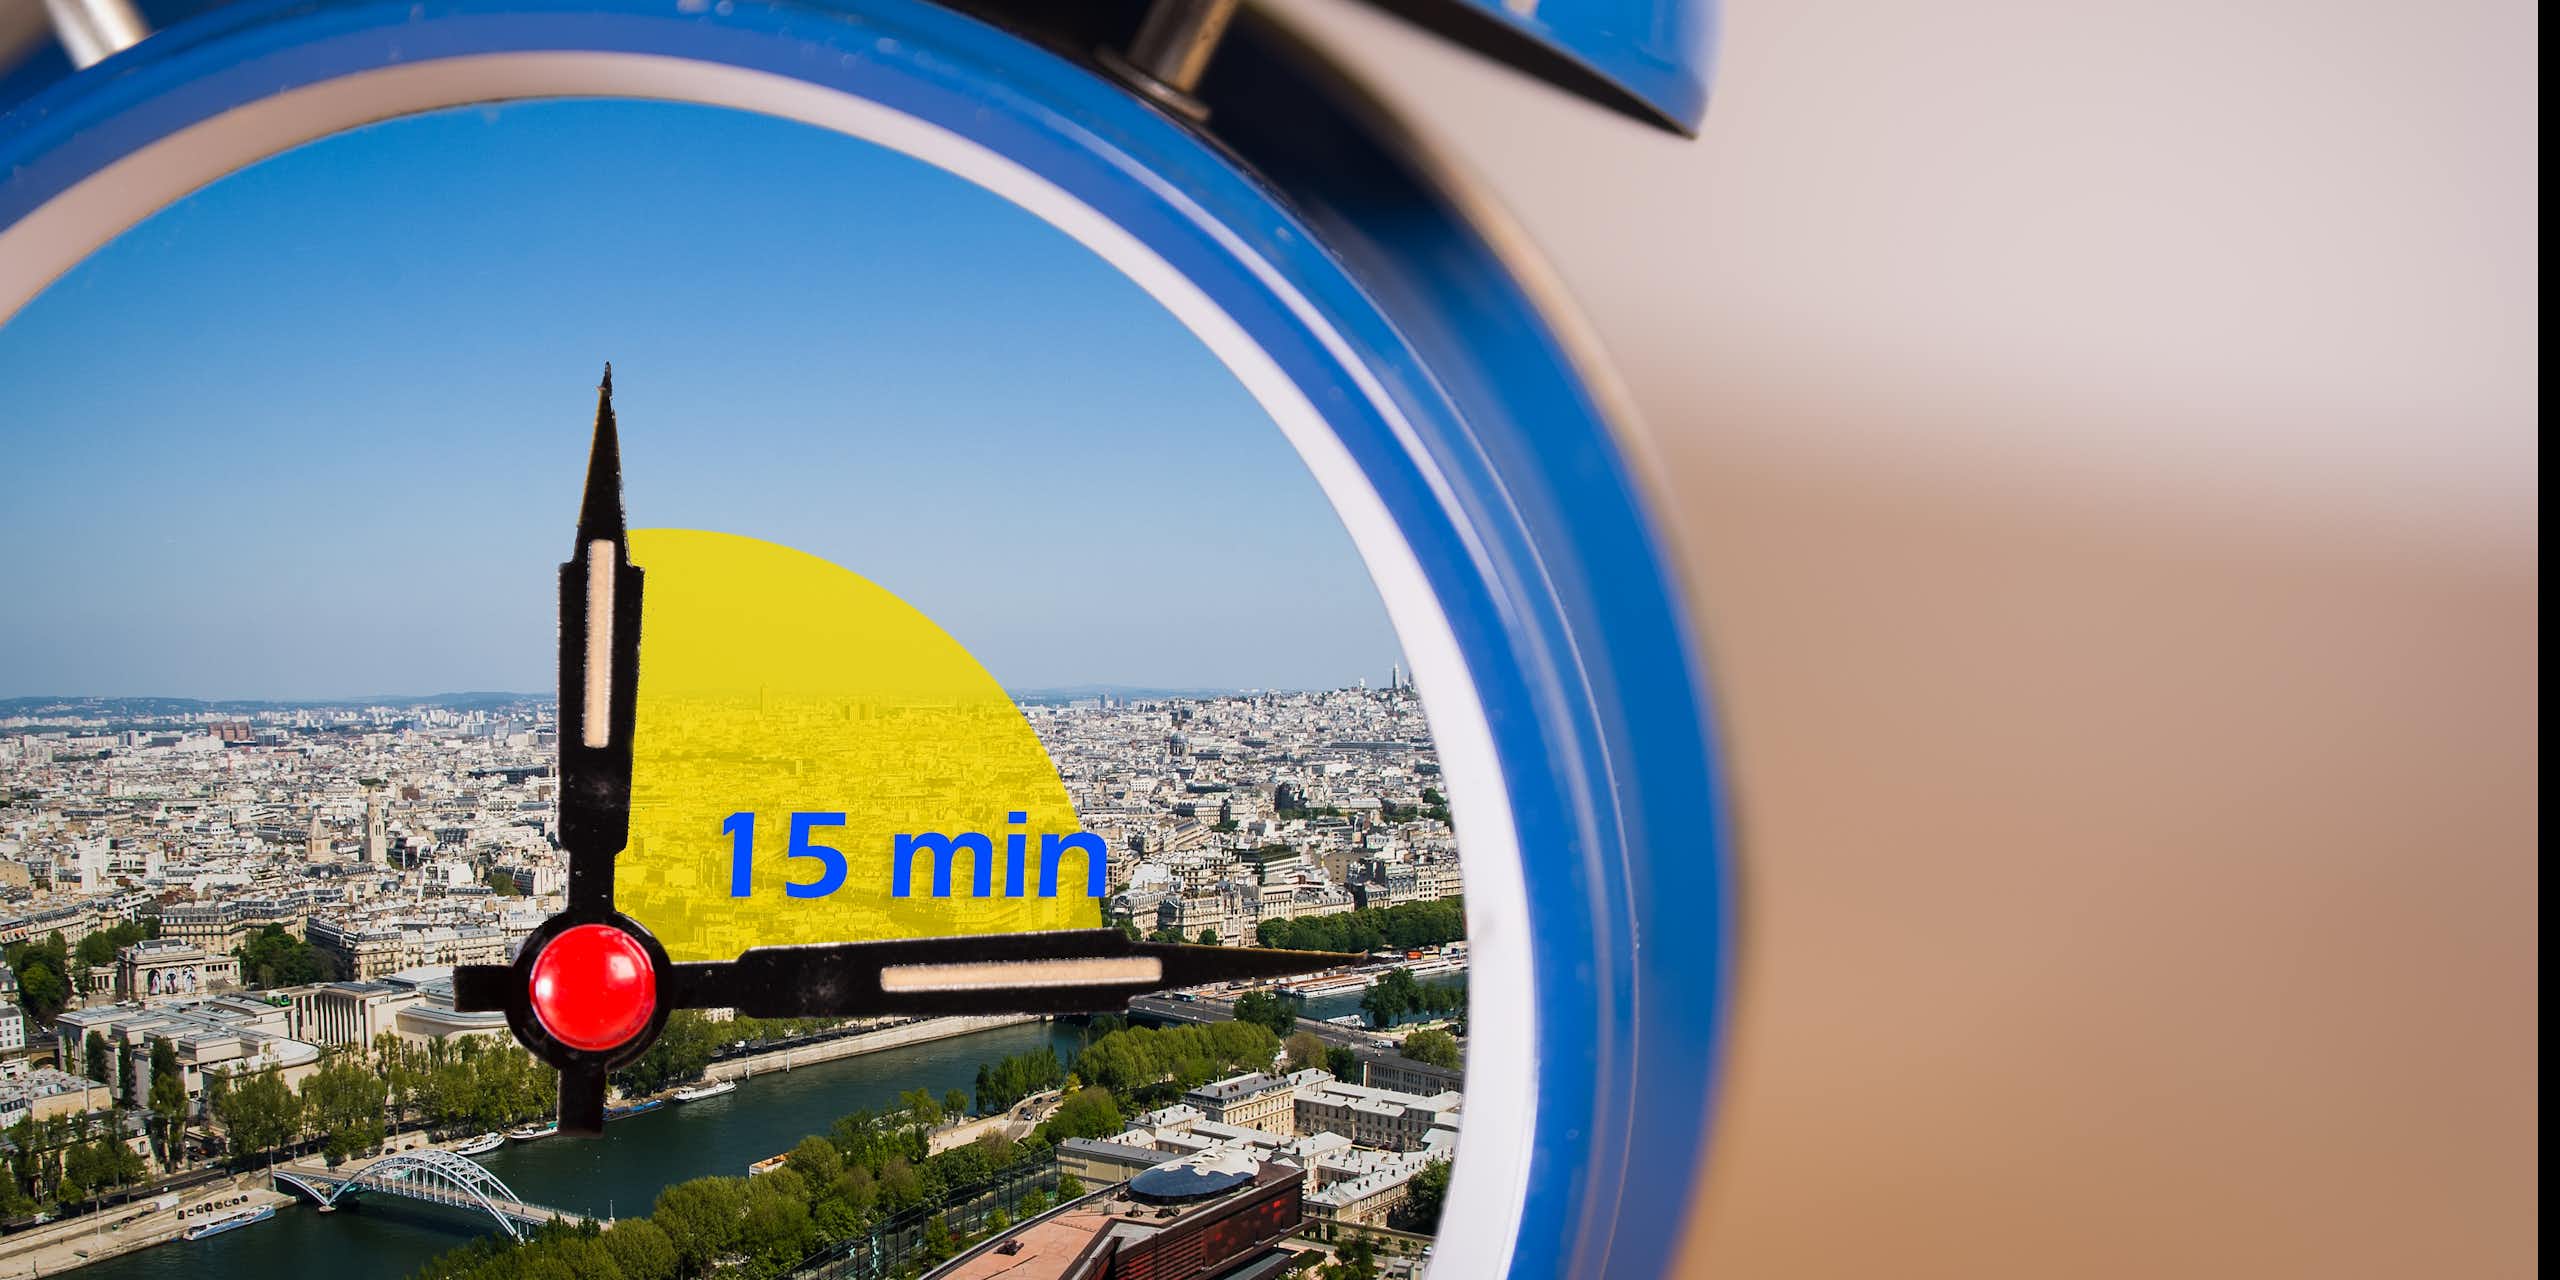 an alarm clock with a 15-minute timer and the background of a city